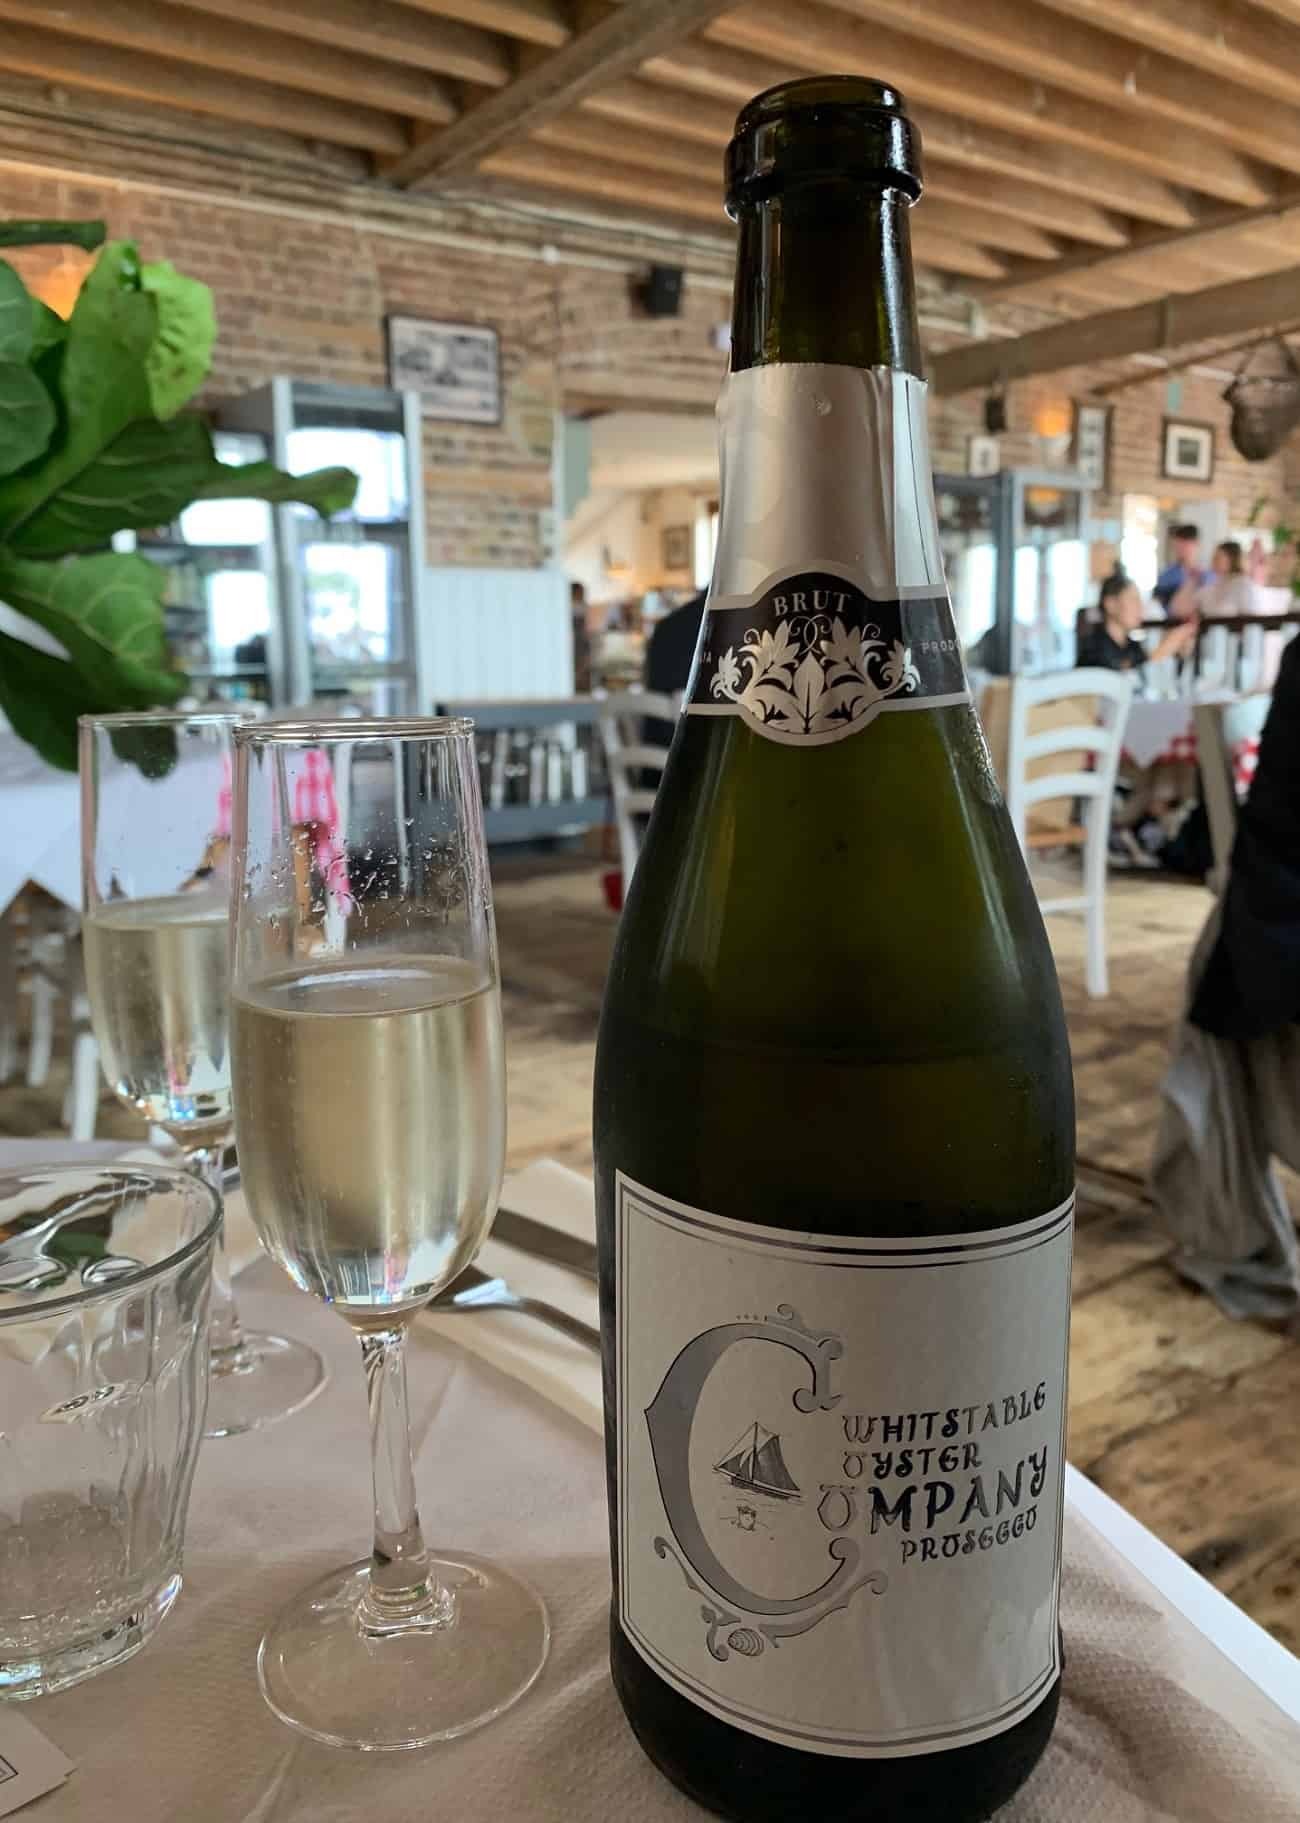 Bottle of branded Prosecco at Whitstable Oyster Company 